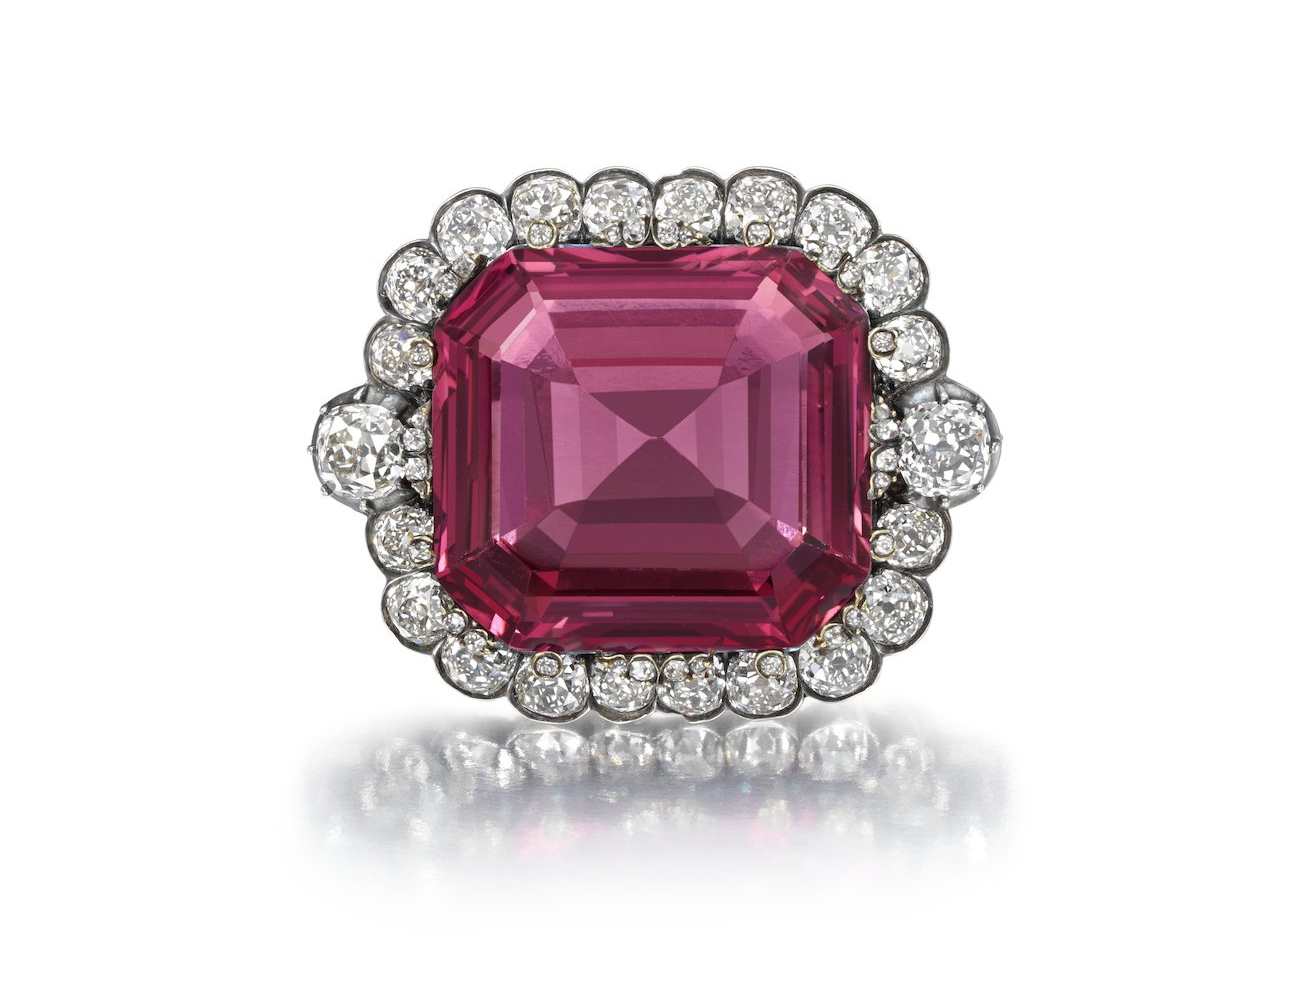 On 24 September 2015, the Hope Spinel sold for $1,464,661 ($29,217/ct), a new auction per carat record for spinel. 